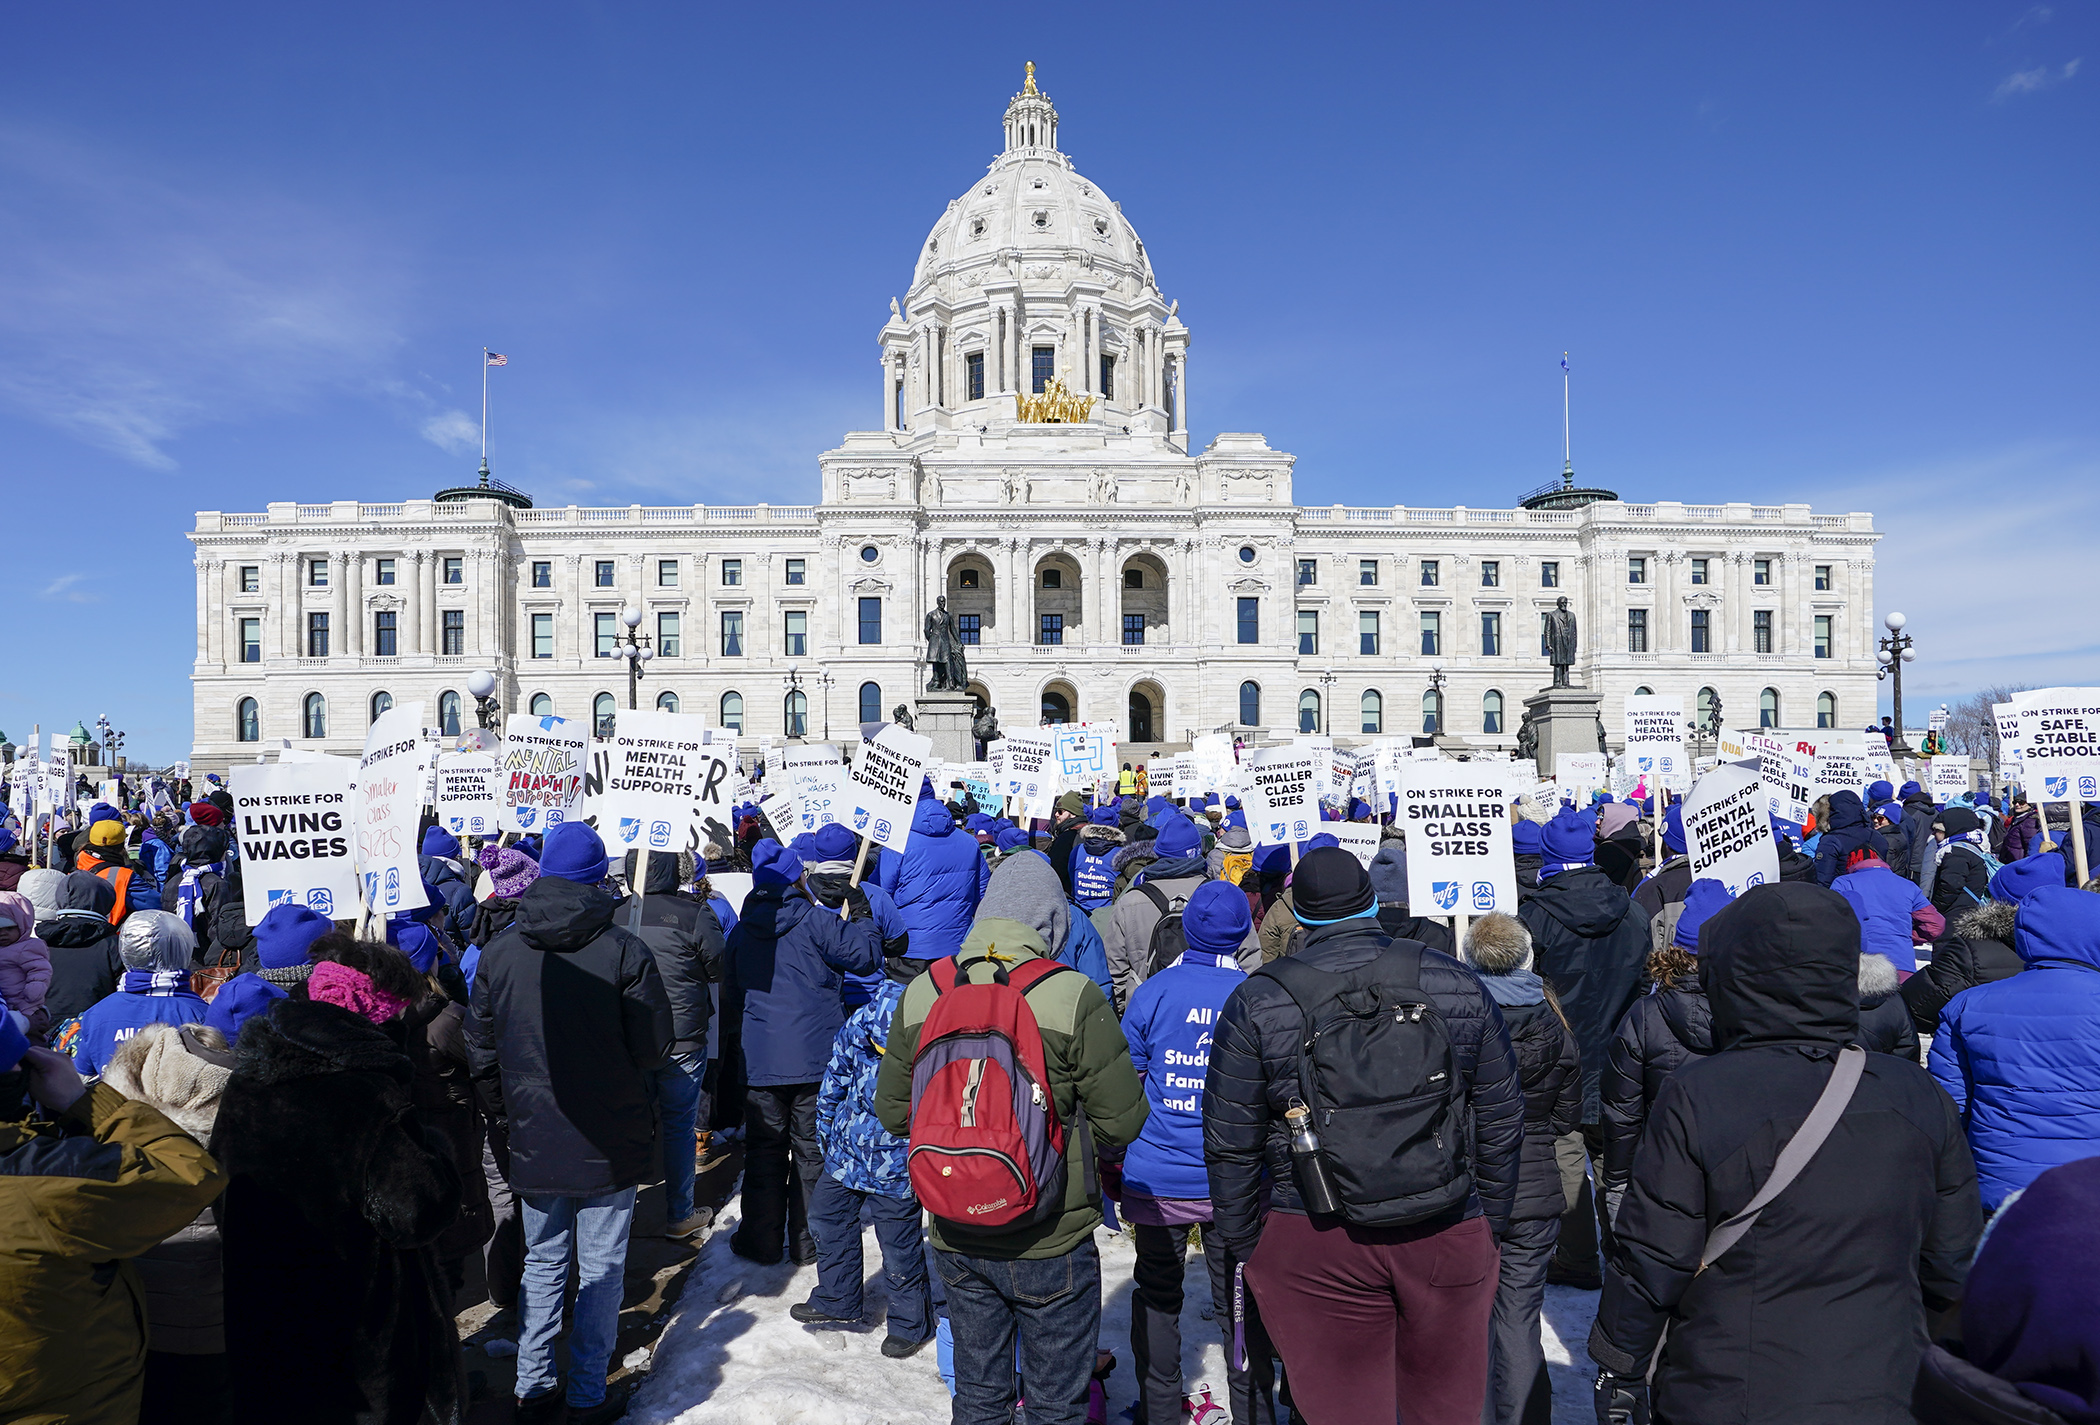 Minneapolis teachers rallied at the State Capitol March 9. (Photo by Paul Battaglia)